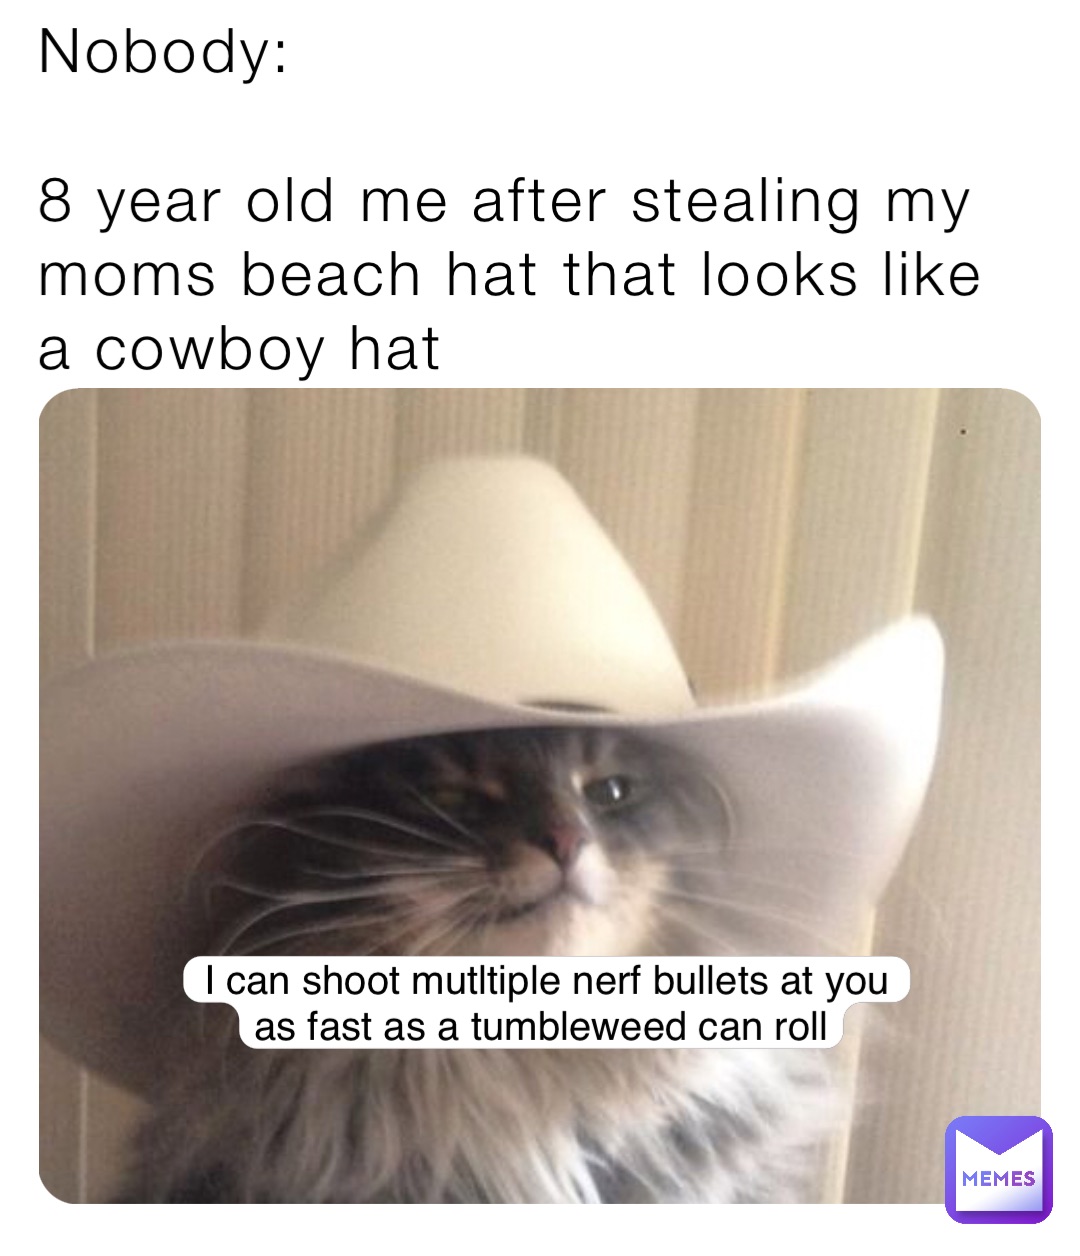 Nobody:

8 year old me after stealing my moms beach hat that looks like a cowboy hat I can shoot mutltiple nerf bullets at you as fast as a tumbleweed can roll